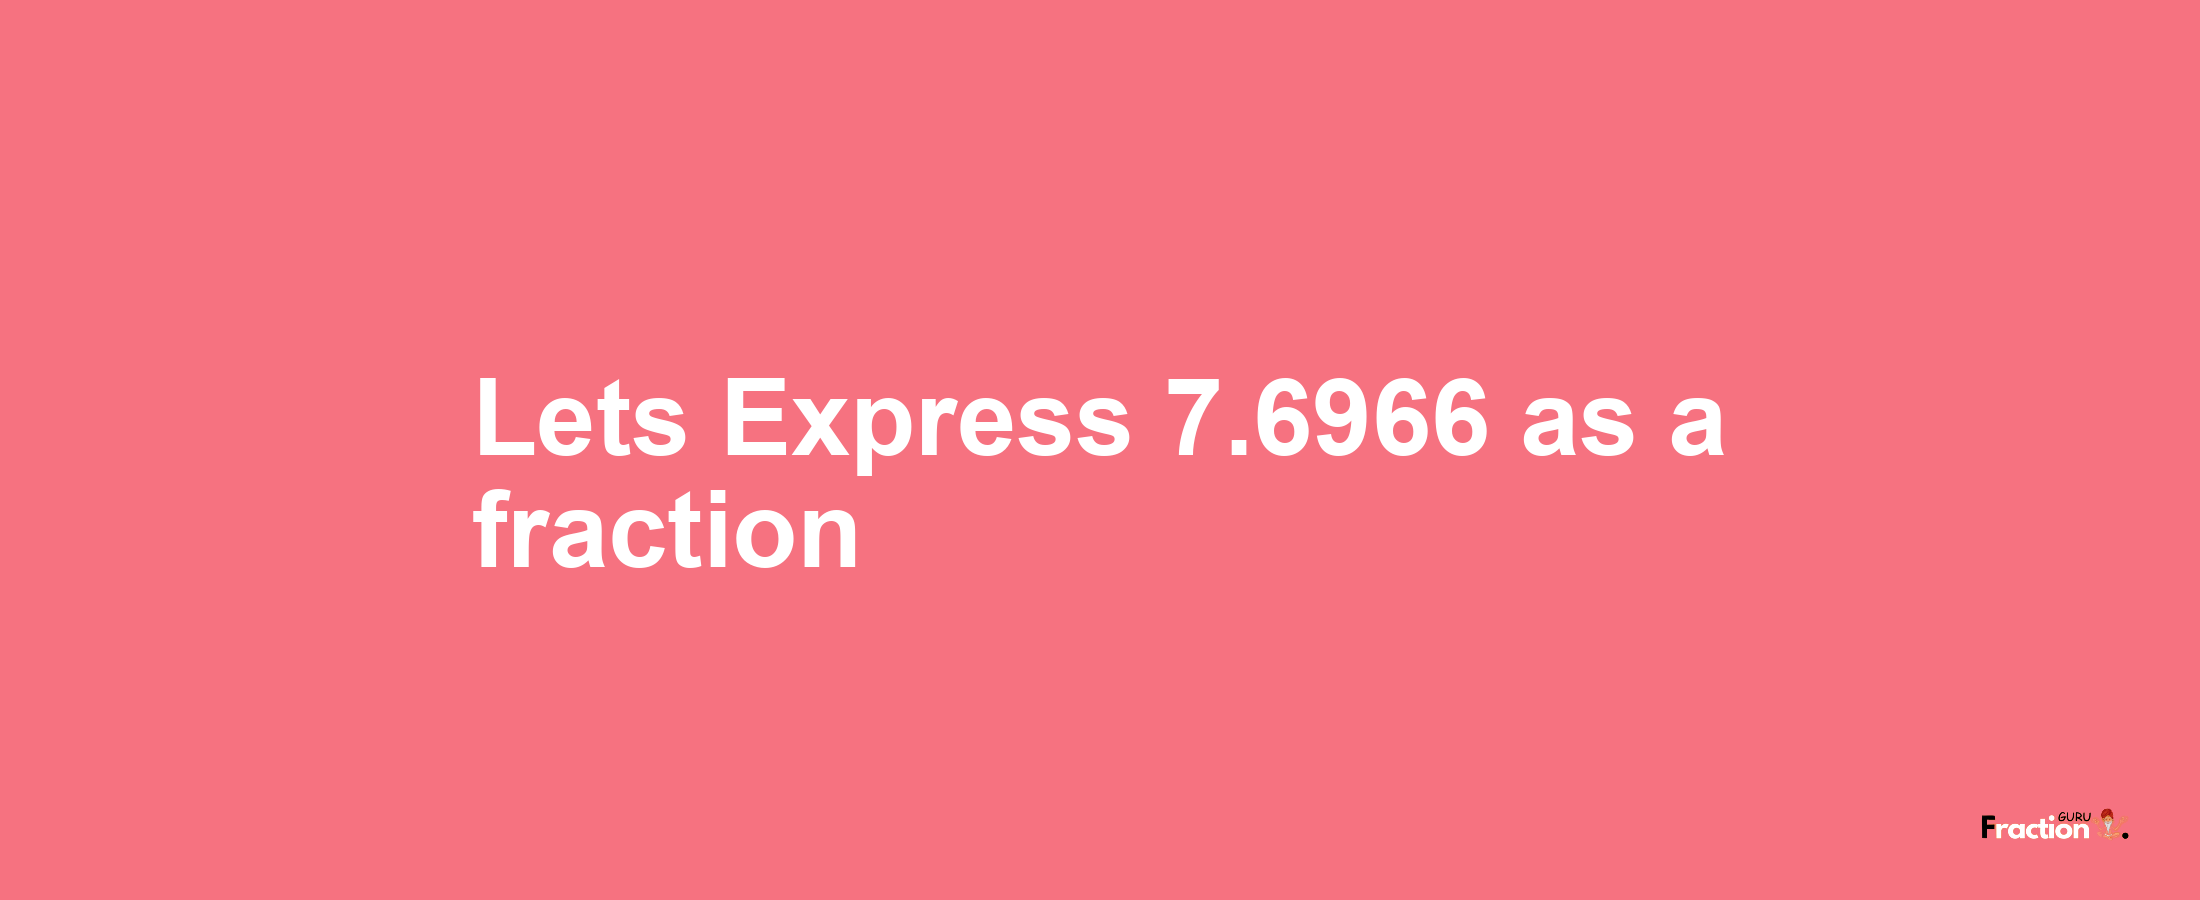 Lets Express 7.6966 as afraction